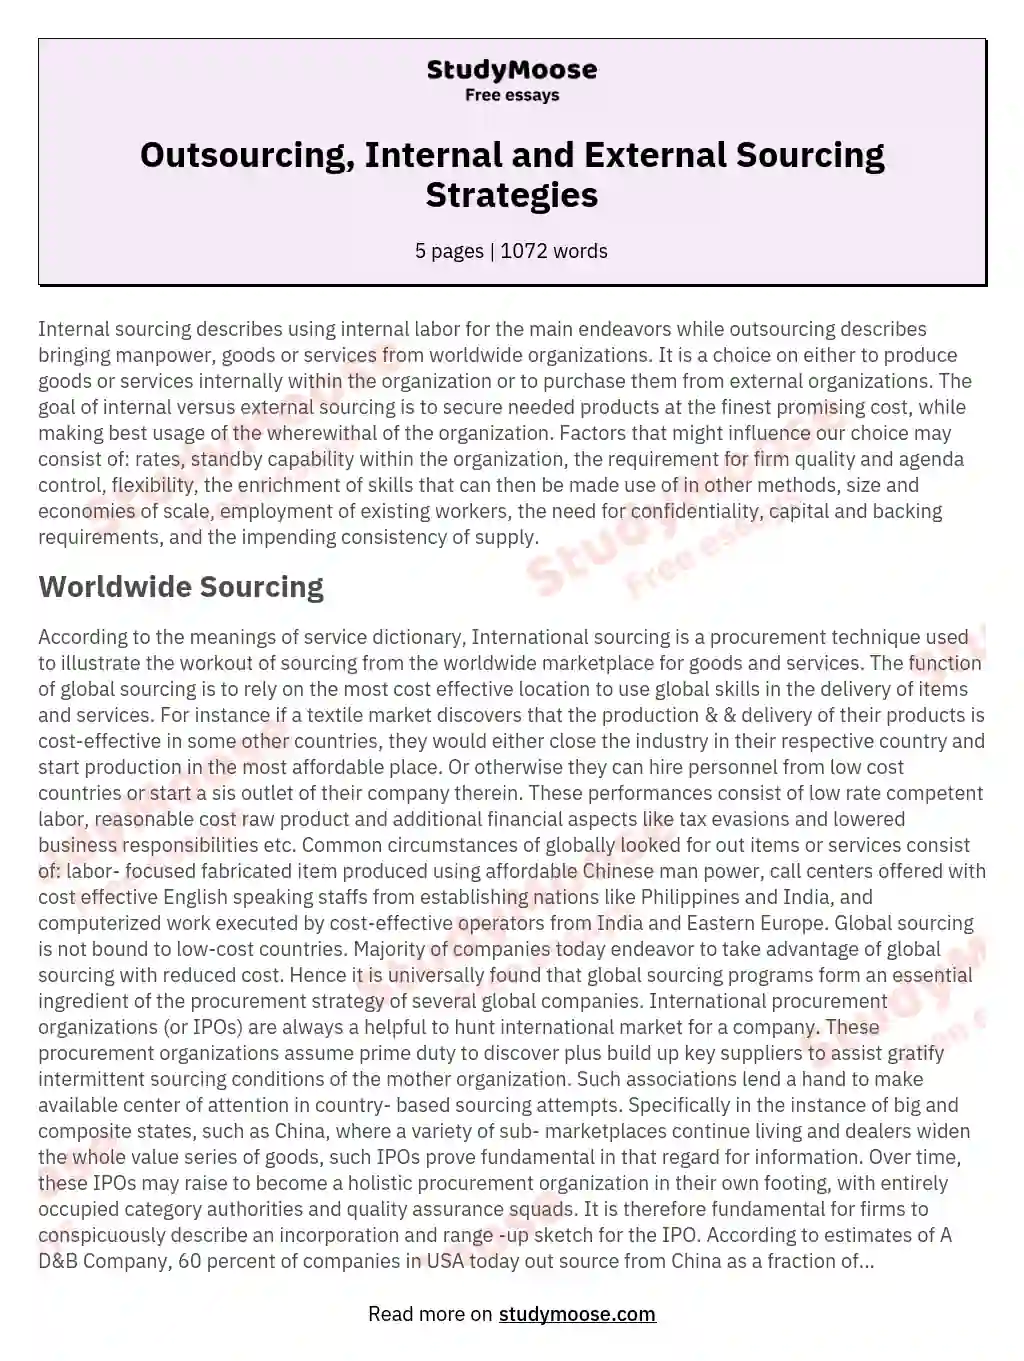 Outsourcing, Internal and External Sourcing Strategies essay